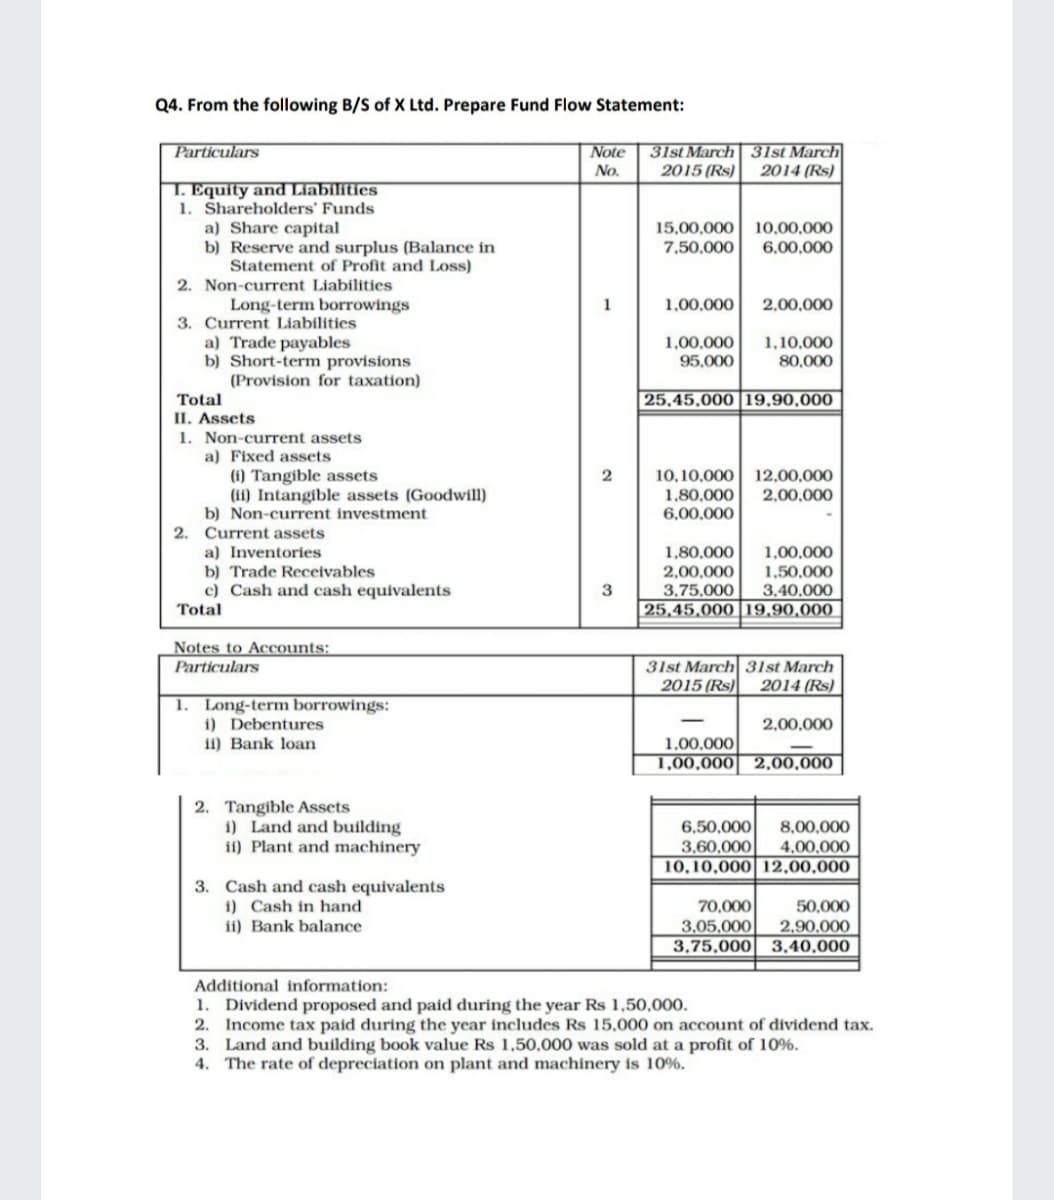 Q4. From the following B/S of X Ltd. Prepare Fund Flow Statement:
Particulars
Note
31st March 31st March
2015 (Rs)
No.
2014 (Rs)
1. Equity and Liabilities
1. Shareholders' Funds
a) Share capital
b) Reserve and surplus (Balance in
Statement of Profit and Loss)
15,00,000 10,00,000
7,50,000
6,00,000
2. Non-current Liabilities
Long-term borrowings
3. Current Liabilities
a) Trade payables
b) Short-term provisions
(Provision for taxation)
1,00,000
2,00,000
1,00,000
1,10,000
80,000
95,000
Total
25,45,000 19,90,000
II. Assets
1. Non-current assets
a) Fixed assets
(1) Tangible assets
(ii) Intangible assets (Goodwill)
b) Non-current investment
2. Current assets
a) Inventories
b) Trade Receivables
c) Cash and cash equivalents
Total
2
10,10,000
12,00,000
1,80,000
6,00,000
2,00,000
1,80,000
2,00,000
3,75,000
25,45,000|19,90,000
1,00,000
1,50,000
3
3,40,000
Notes to Accounts:
Particulars
31st March 31st March
2015 (Rs)
2014 (Rs)
1. Long-term borrowings:
i) Debentures
ii) Bank loan
2,00,000
1,00,000
1,00,000| 2,00,000 |
2. Tangible Assets
1) Land and building
ii) Plant and machinery
8,00,000
4,00,000
6,50,000
3,60,000
10,10,000|12,00,000
3. Cash and cash equivalents
i) Cash in hand
ii) Bank balance
70,000
3,05,000
3,75,000 3,40,000
50,000
2,90,000
Additional information:
1. Dividend proposed and paid during the year Rs 1,50,000.
2. Income tax paid during the year includes Rs 15,000 on account of dividend tax.
3. Land and building book value Rs 1,50,000 was sold at a profit of 10%.
4. The rate of depreciation on plant and machinery is 10%.
